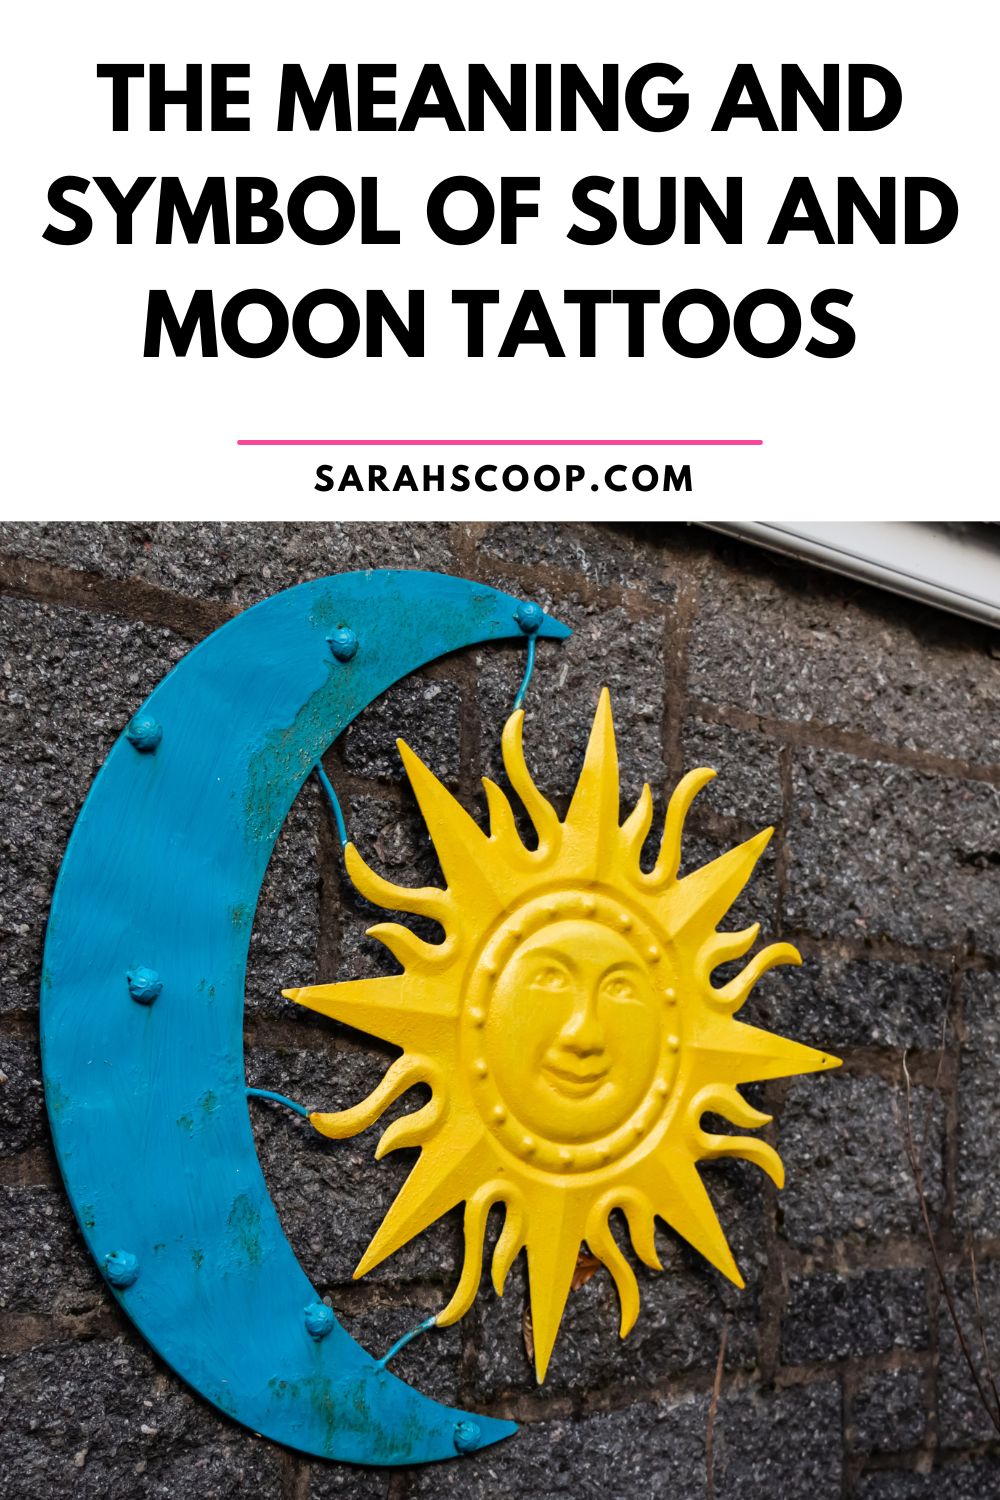 The Meaning And Symbol of Sun And Moon Tattoos - Sarah Scoop